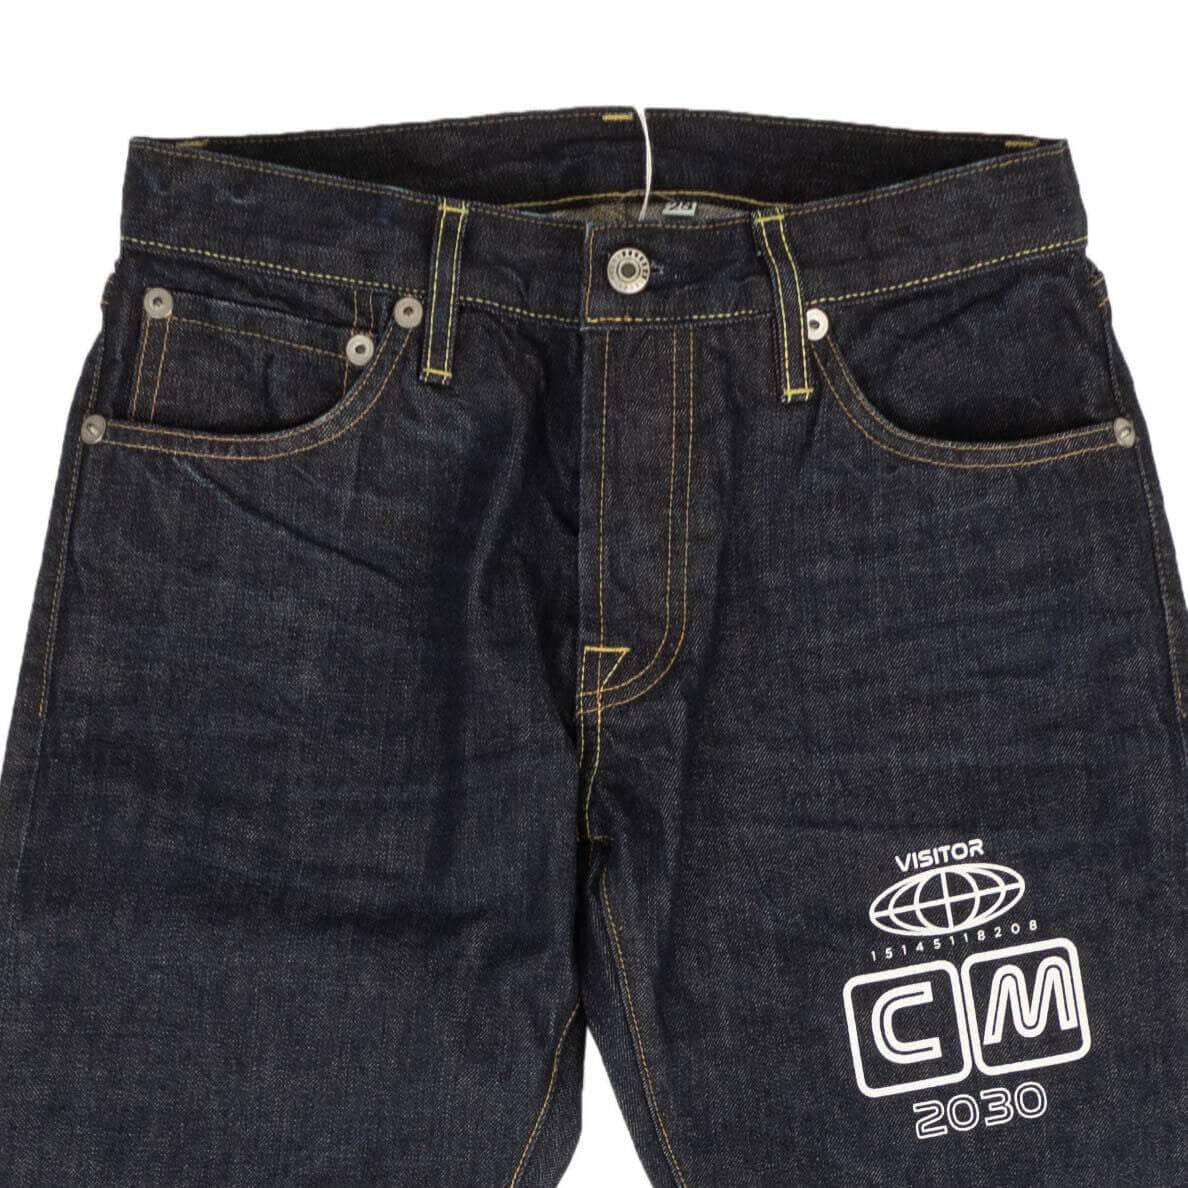 Visitor on Earth 250-500, channelenable-all, chicmi, couponcollection, gender-mens, main-clothing, mens-shoes, mens-slim-fit-jeans, size-28, size-29, size-30, size-31, size-32, size-33, size-34, size-36, visitor-on-earth Navy Blue Logo Denim Jeans